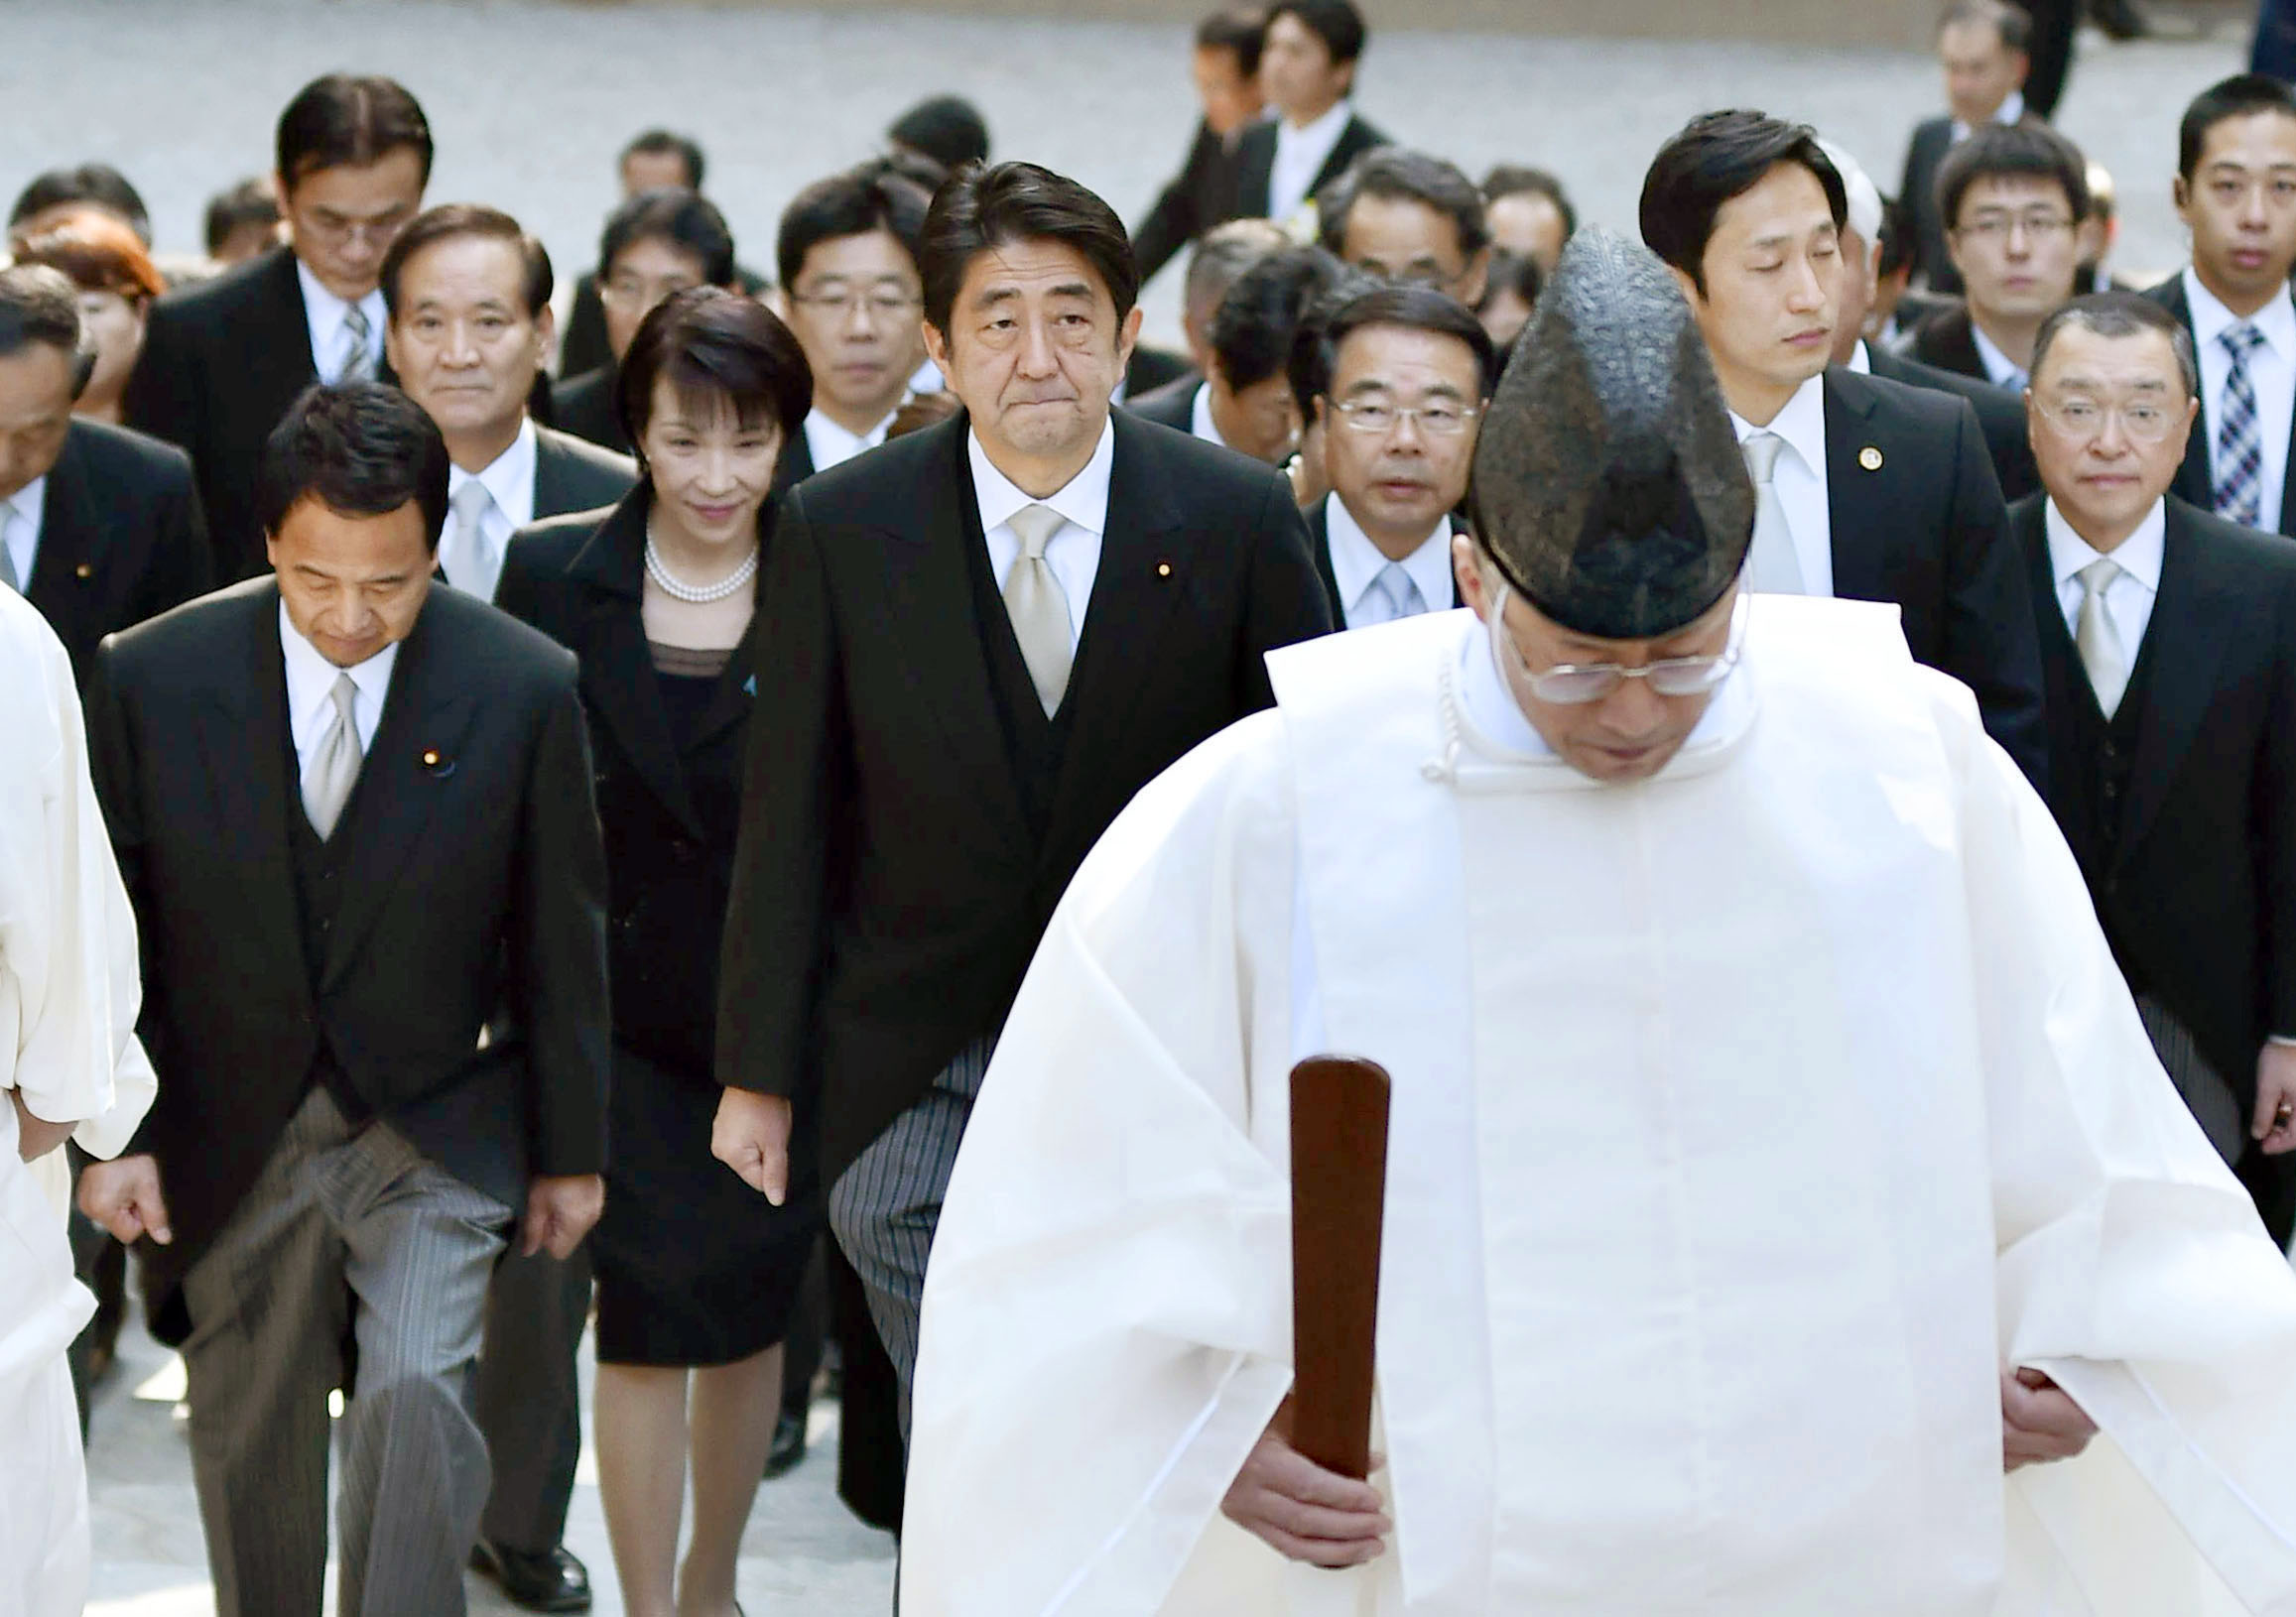 Japan S Leader Says He Will Express Remorse For World War Ii The